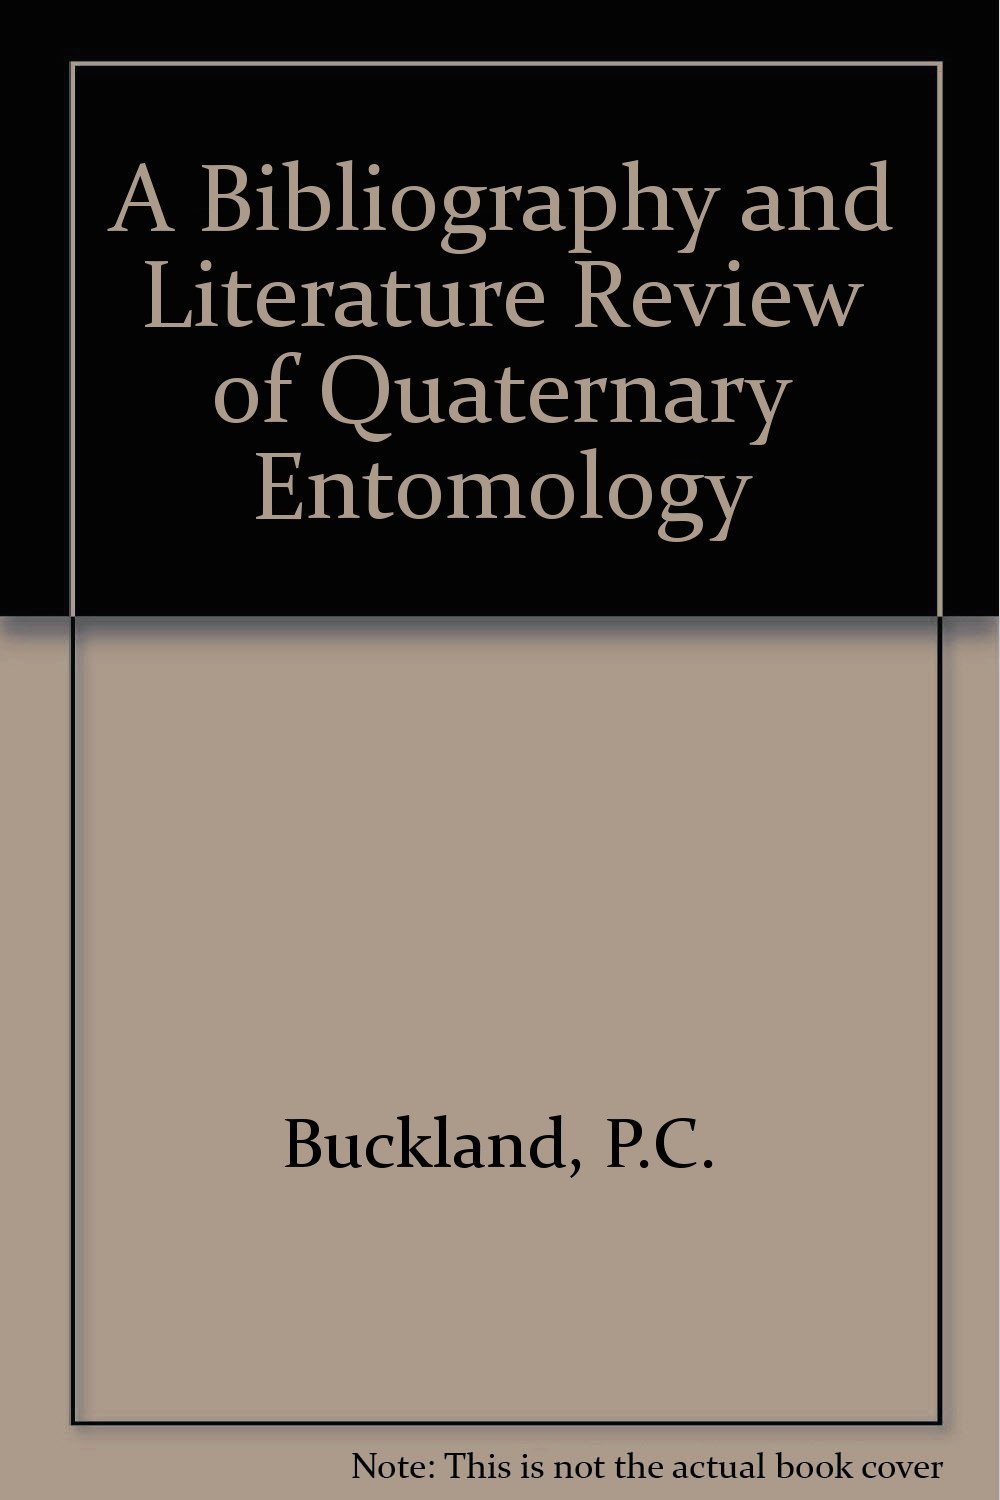 A Bibliography and Literature Review of Quaternary Entomology